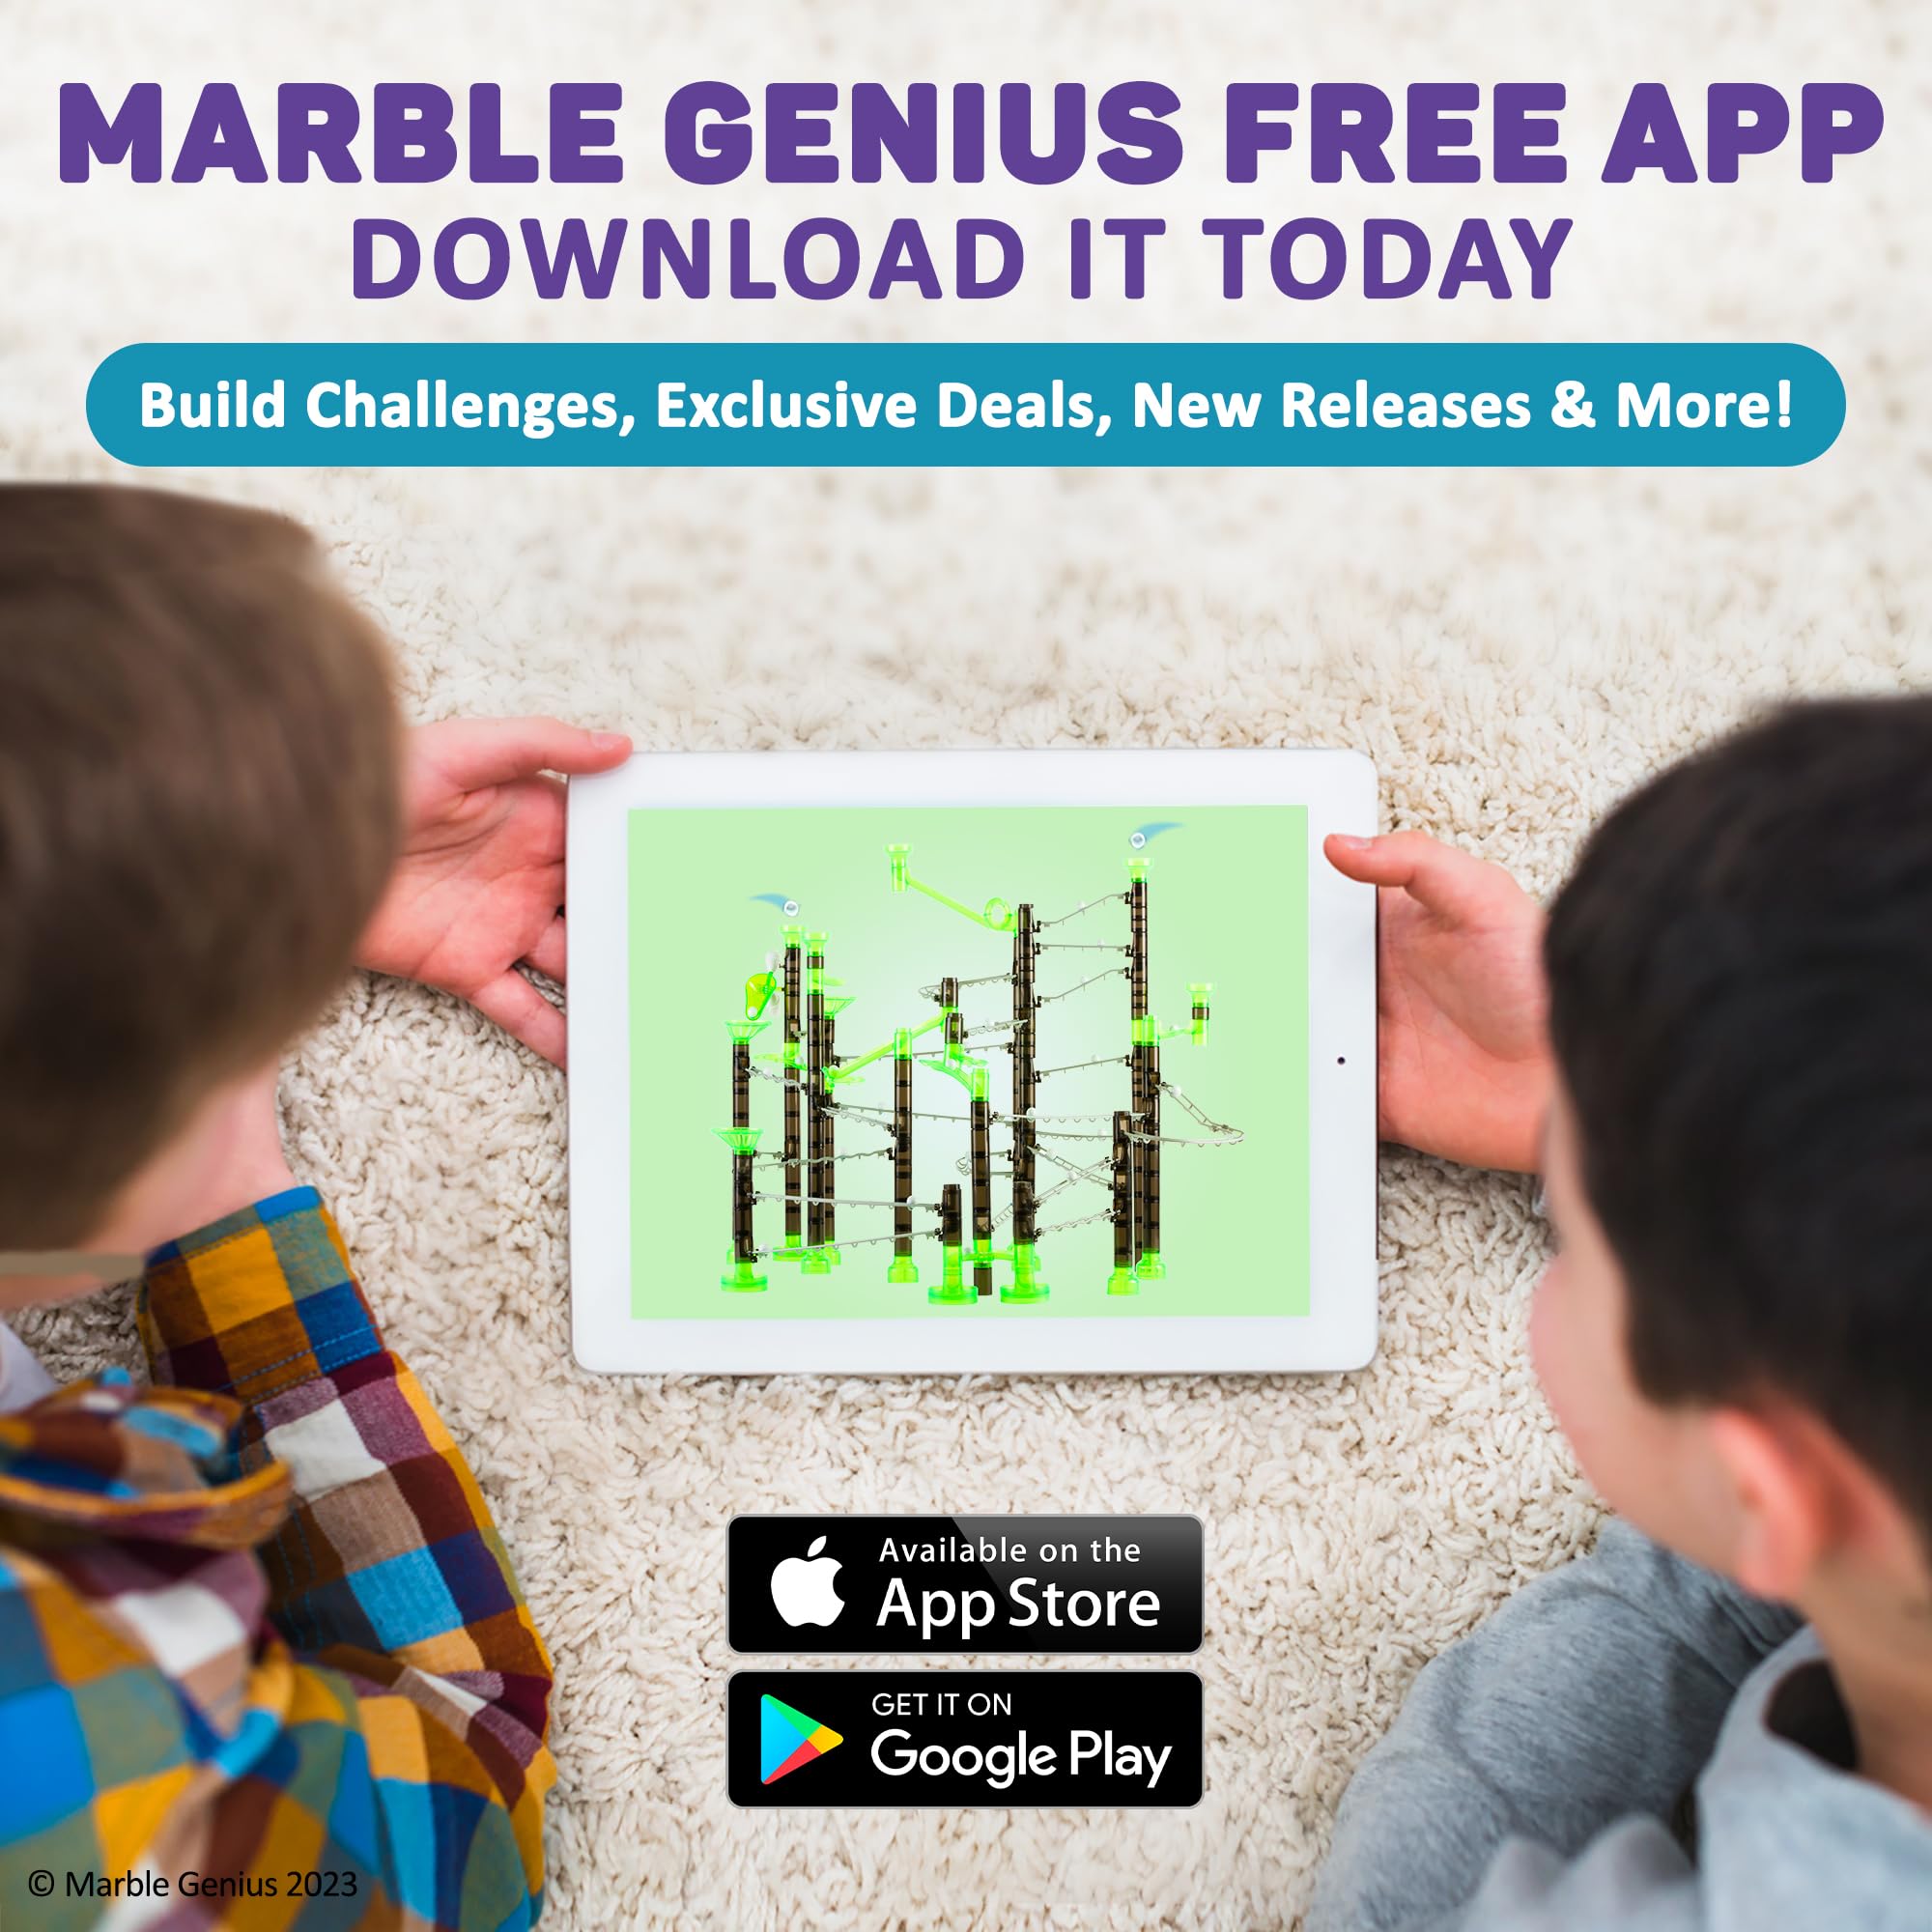 Marble Genius Bundle: Marble Rails Super Set (325 Pieces), Automatic Chain Lift, Marble Rails Booster Set (30 Pieces), Endless Fun, and Creativity, Experience The Thrills of Marble Racing